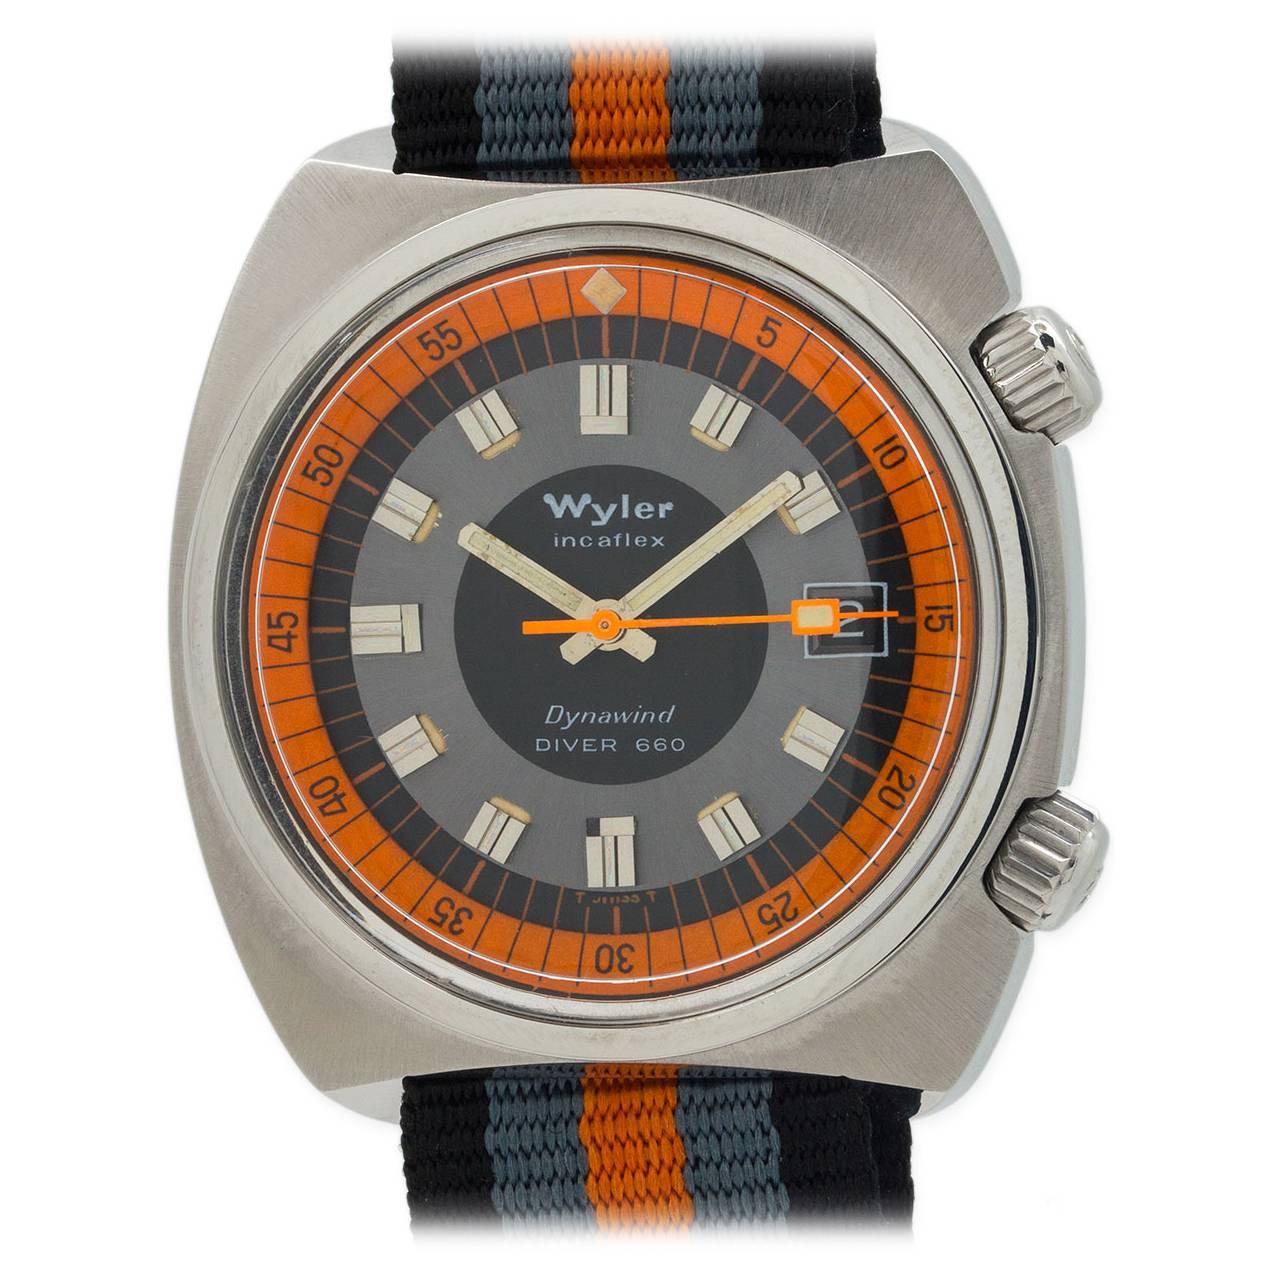 Wyler Stainless Steel Dynawind Divers 660 Wristwach circa 1960s